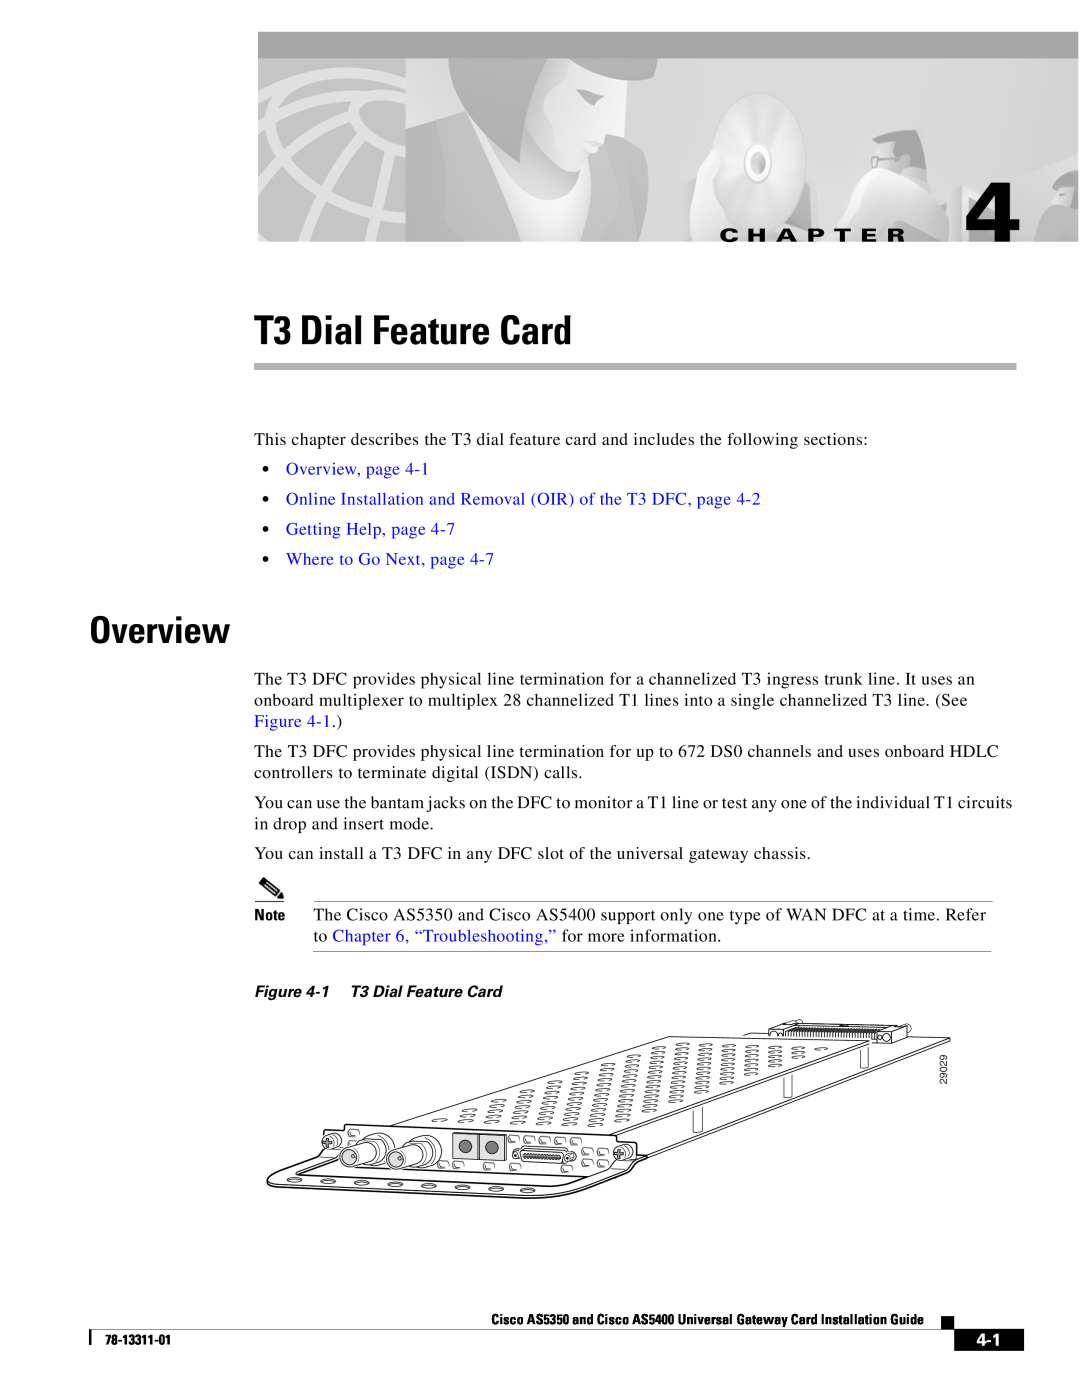 Cisco Systems AS5400 manual T3 Dial Feature Card, Online Installation and Removal OIR of the T3 DFC, page, Overview 